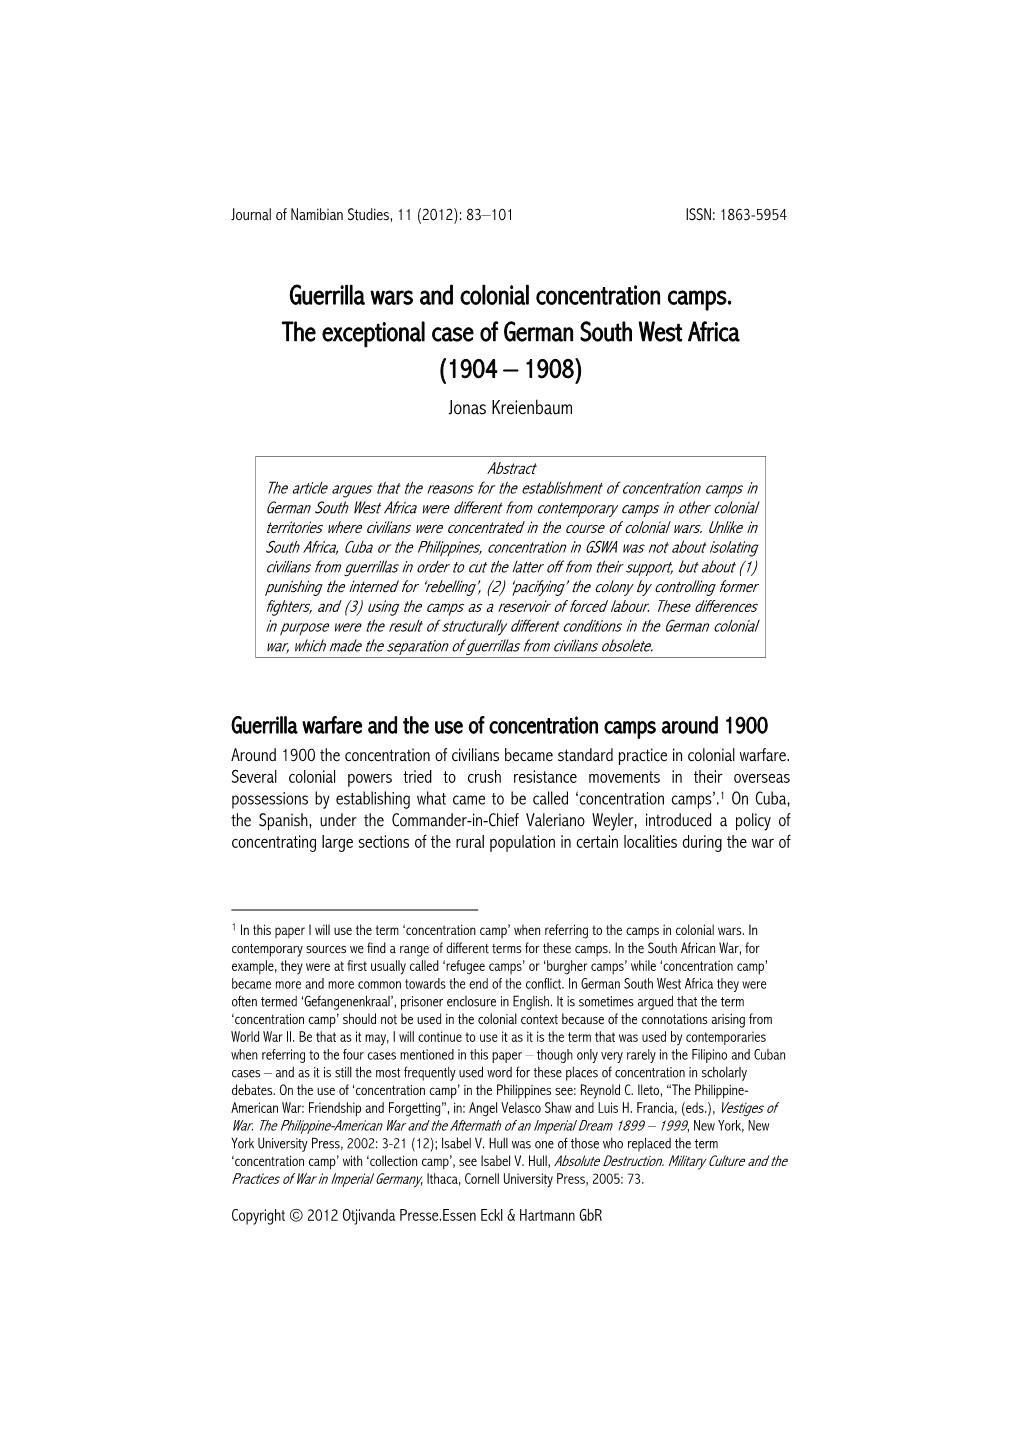 Guerrilla Wars and Colonial Concentration Camps. the Exceptional Case of German South West Africa (1904 – 1908) Jonas Kreienbaum